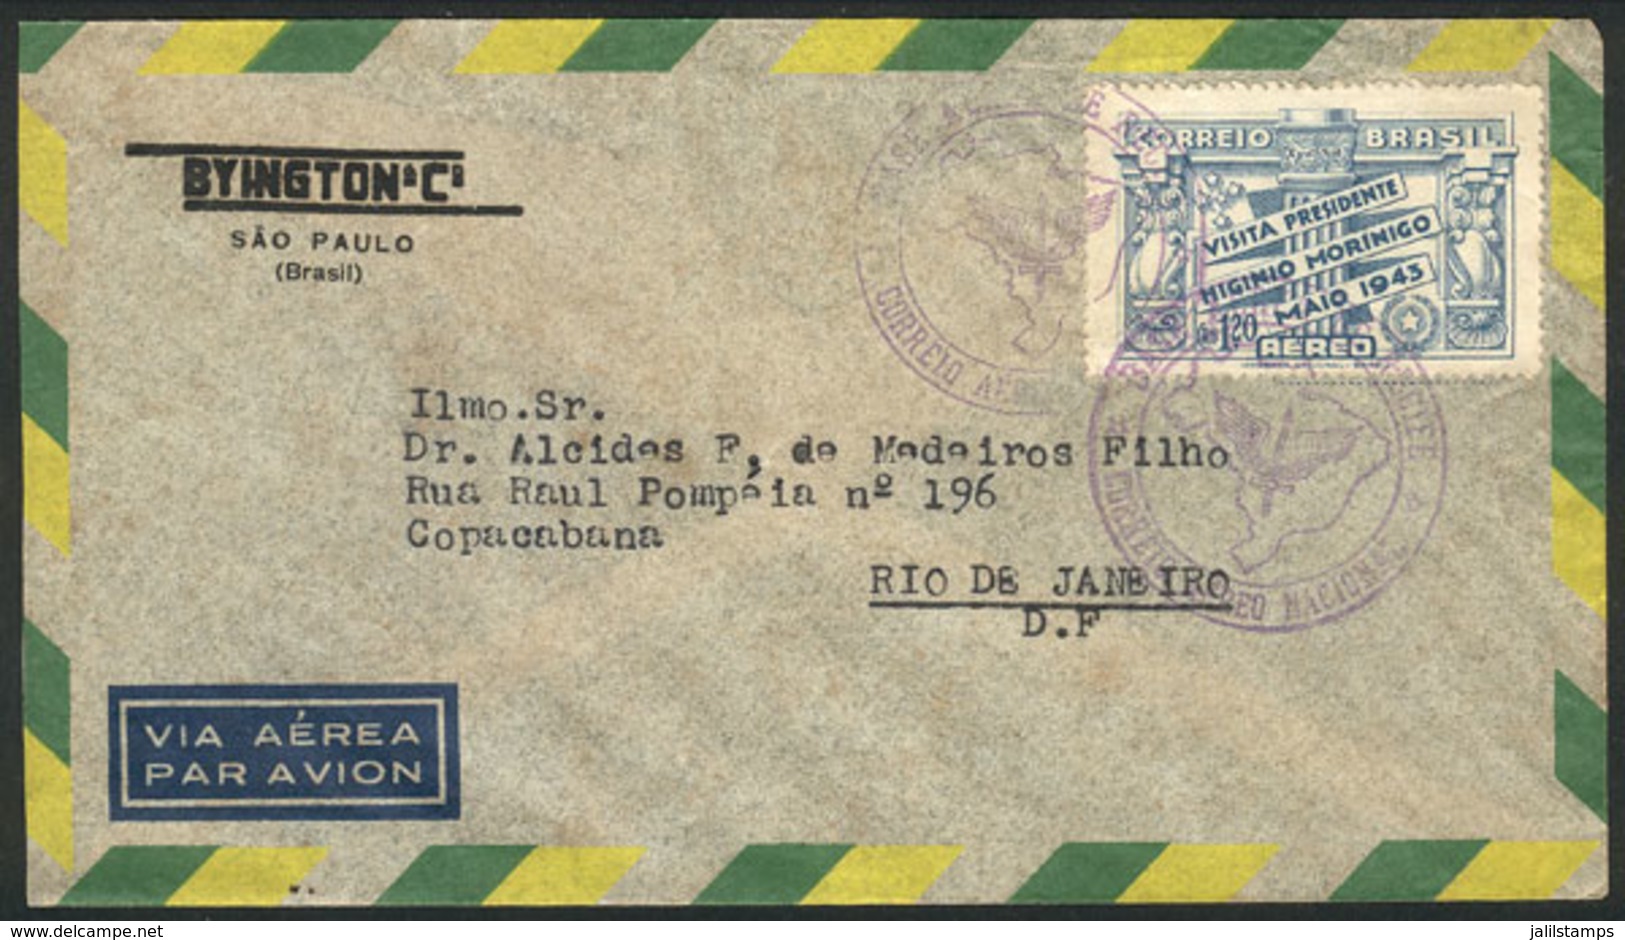 BRAZIL: Airmail Cover Sent From Recife To Rio On 27/MAR/1944 Franked With 1.20Cr., Violet Postmarks: "BASE AEREA DE RECI - Prefilatelia